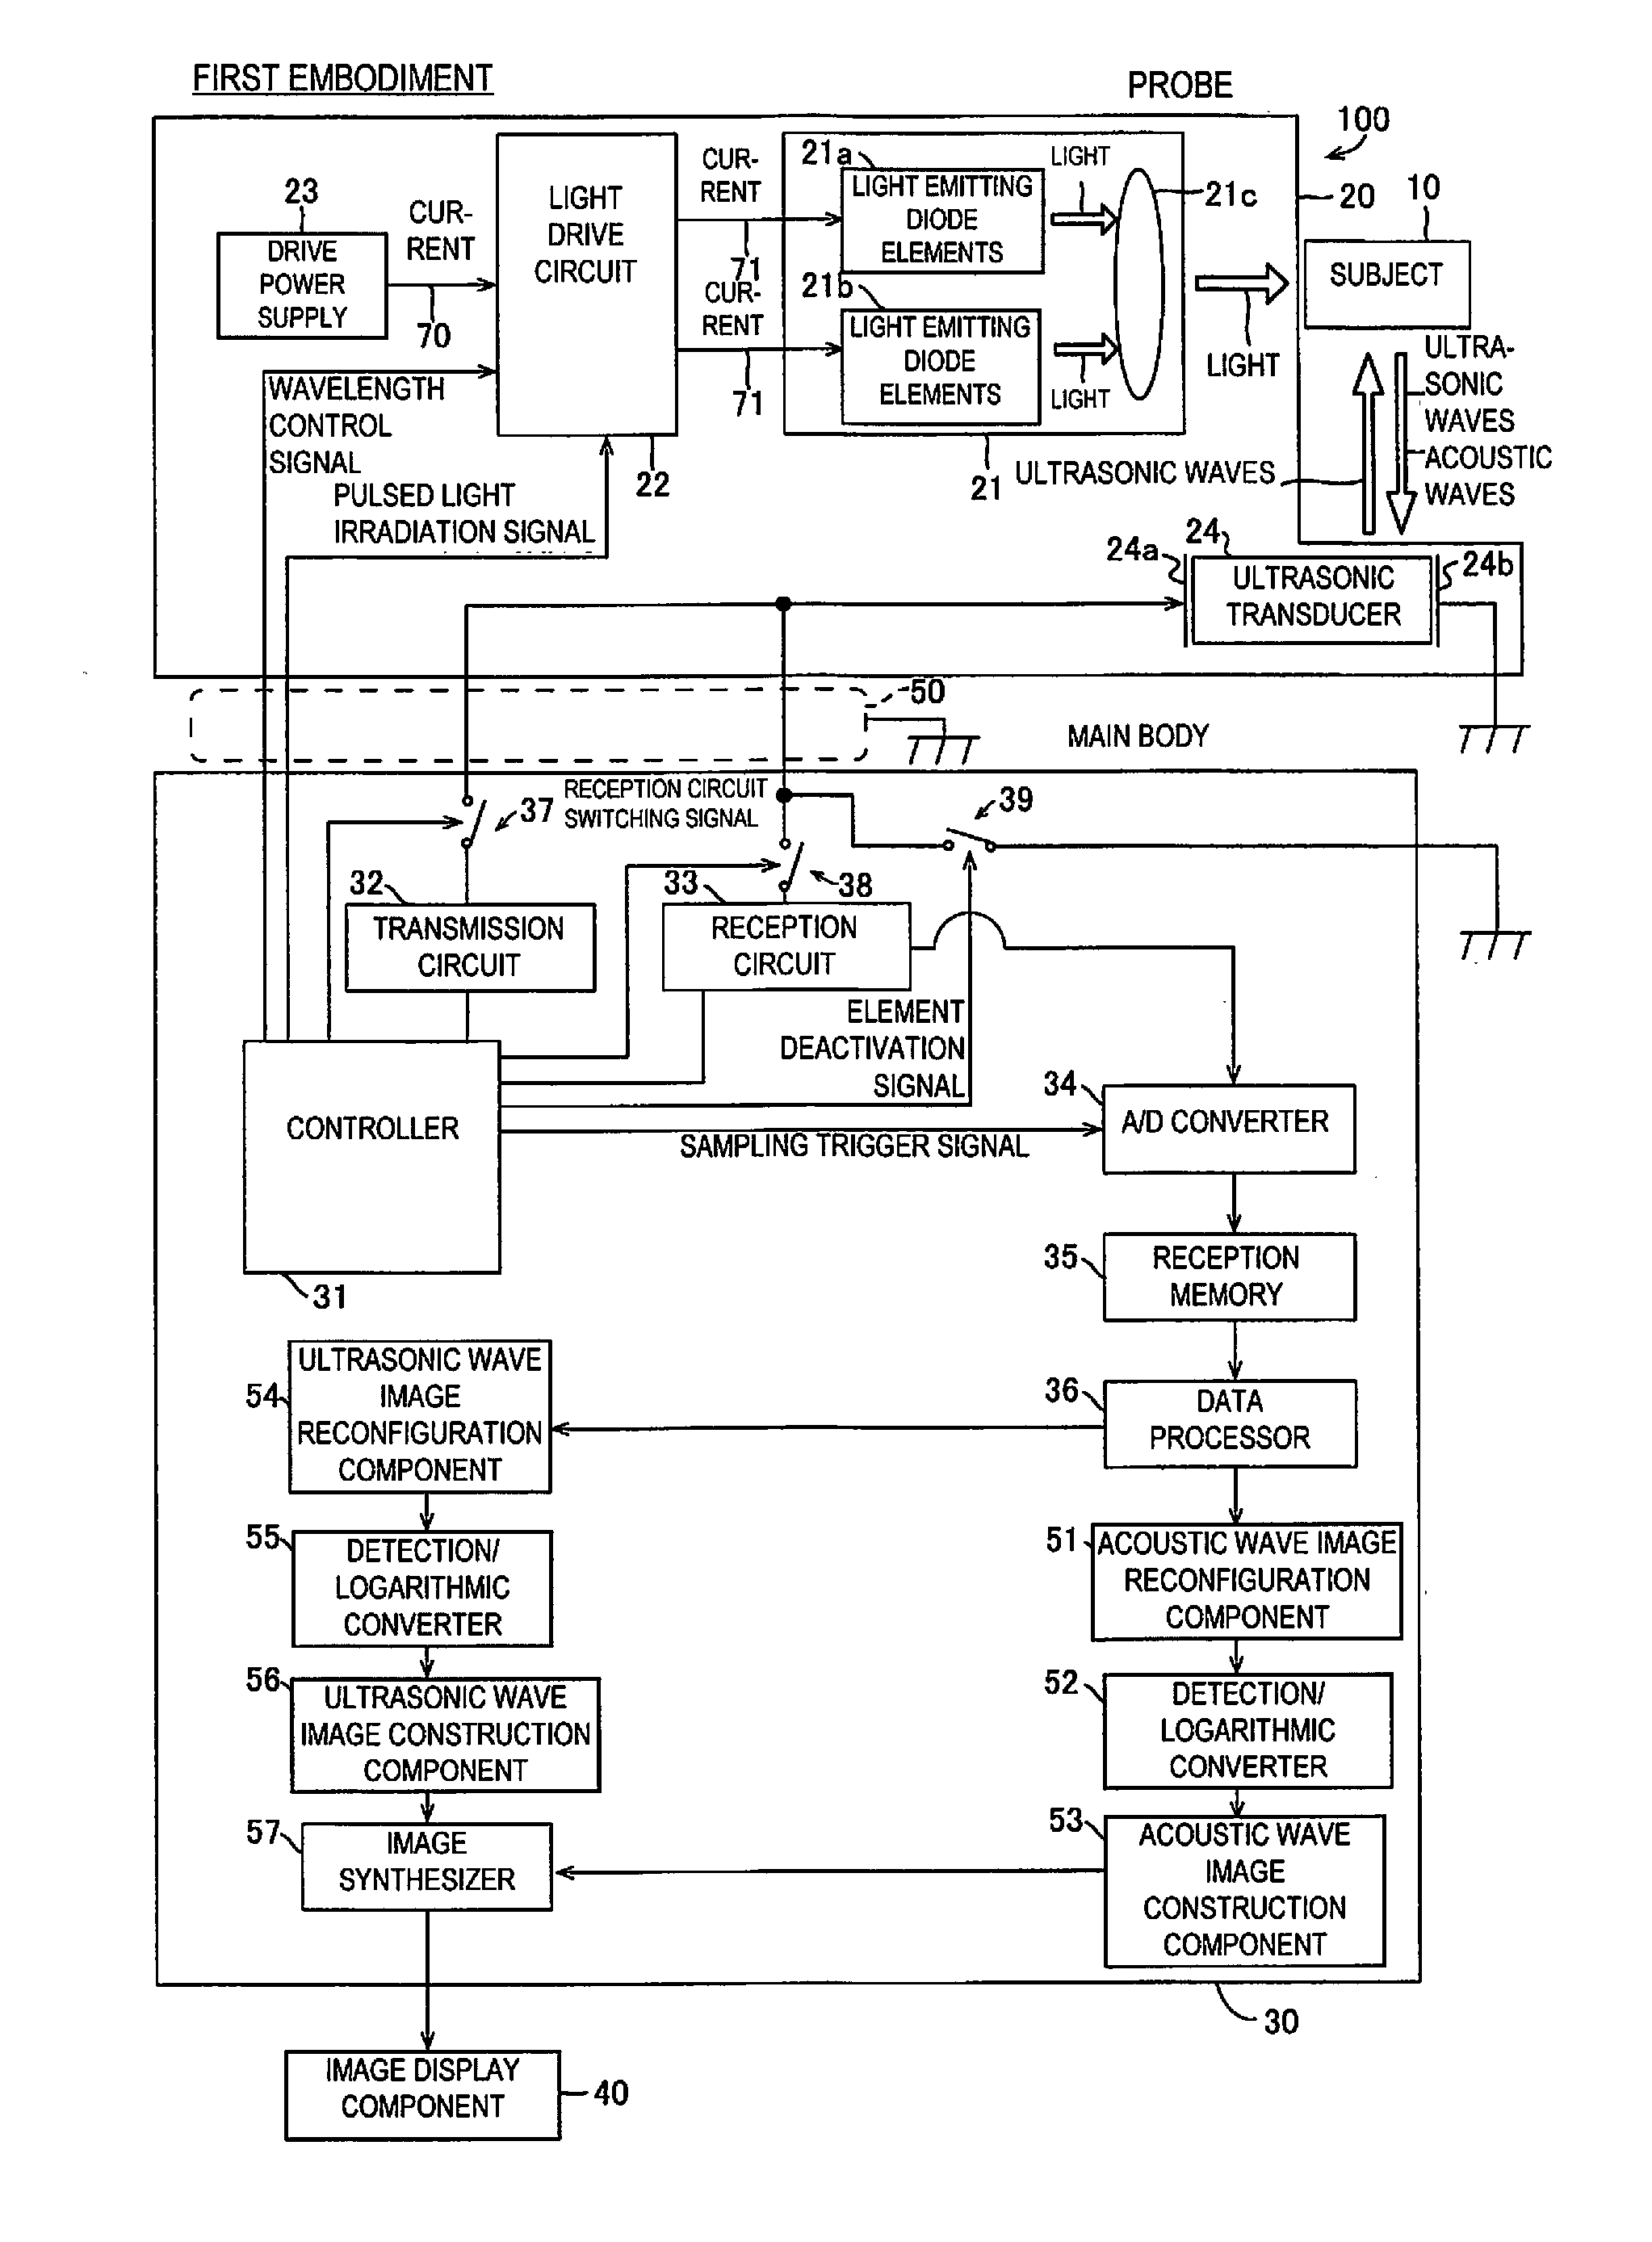 Photoacoustic imaging device